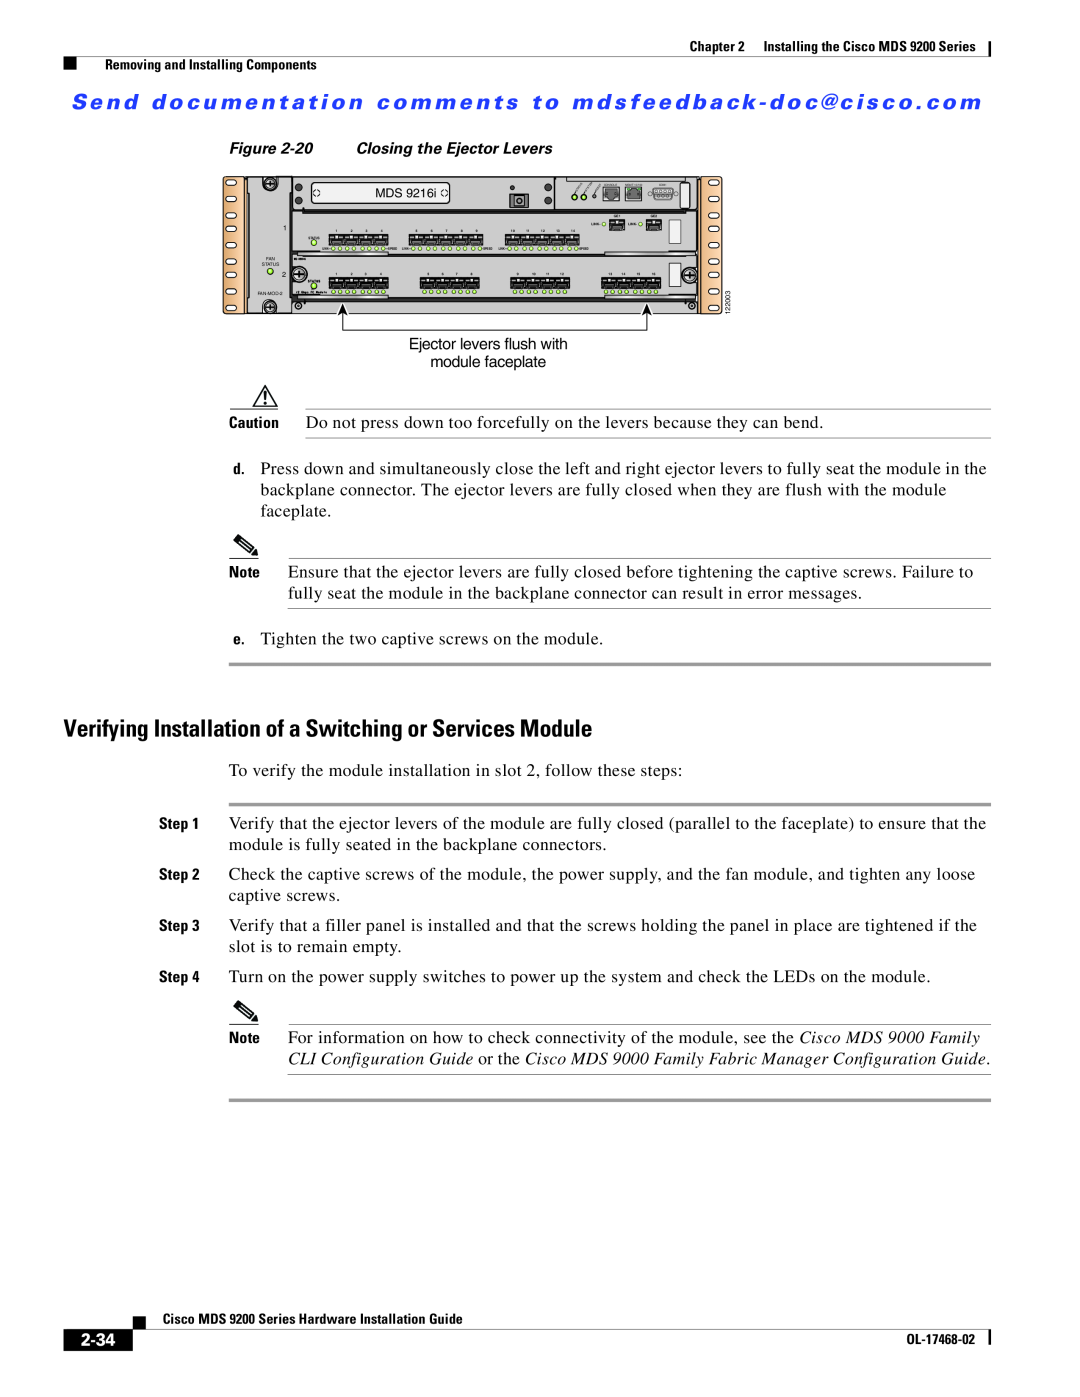 Cisco Systems MDS 9200 Series manual Verifying Installation of a Switching or Services Module, 2-34 